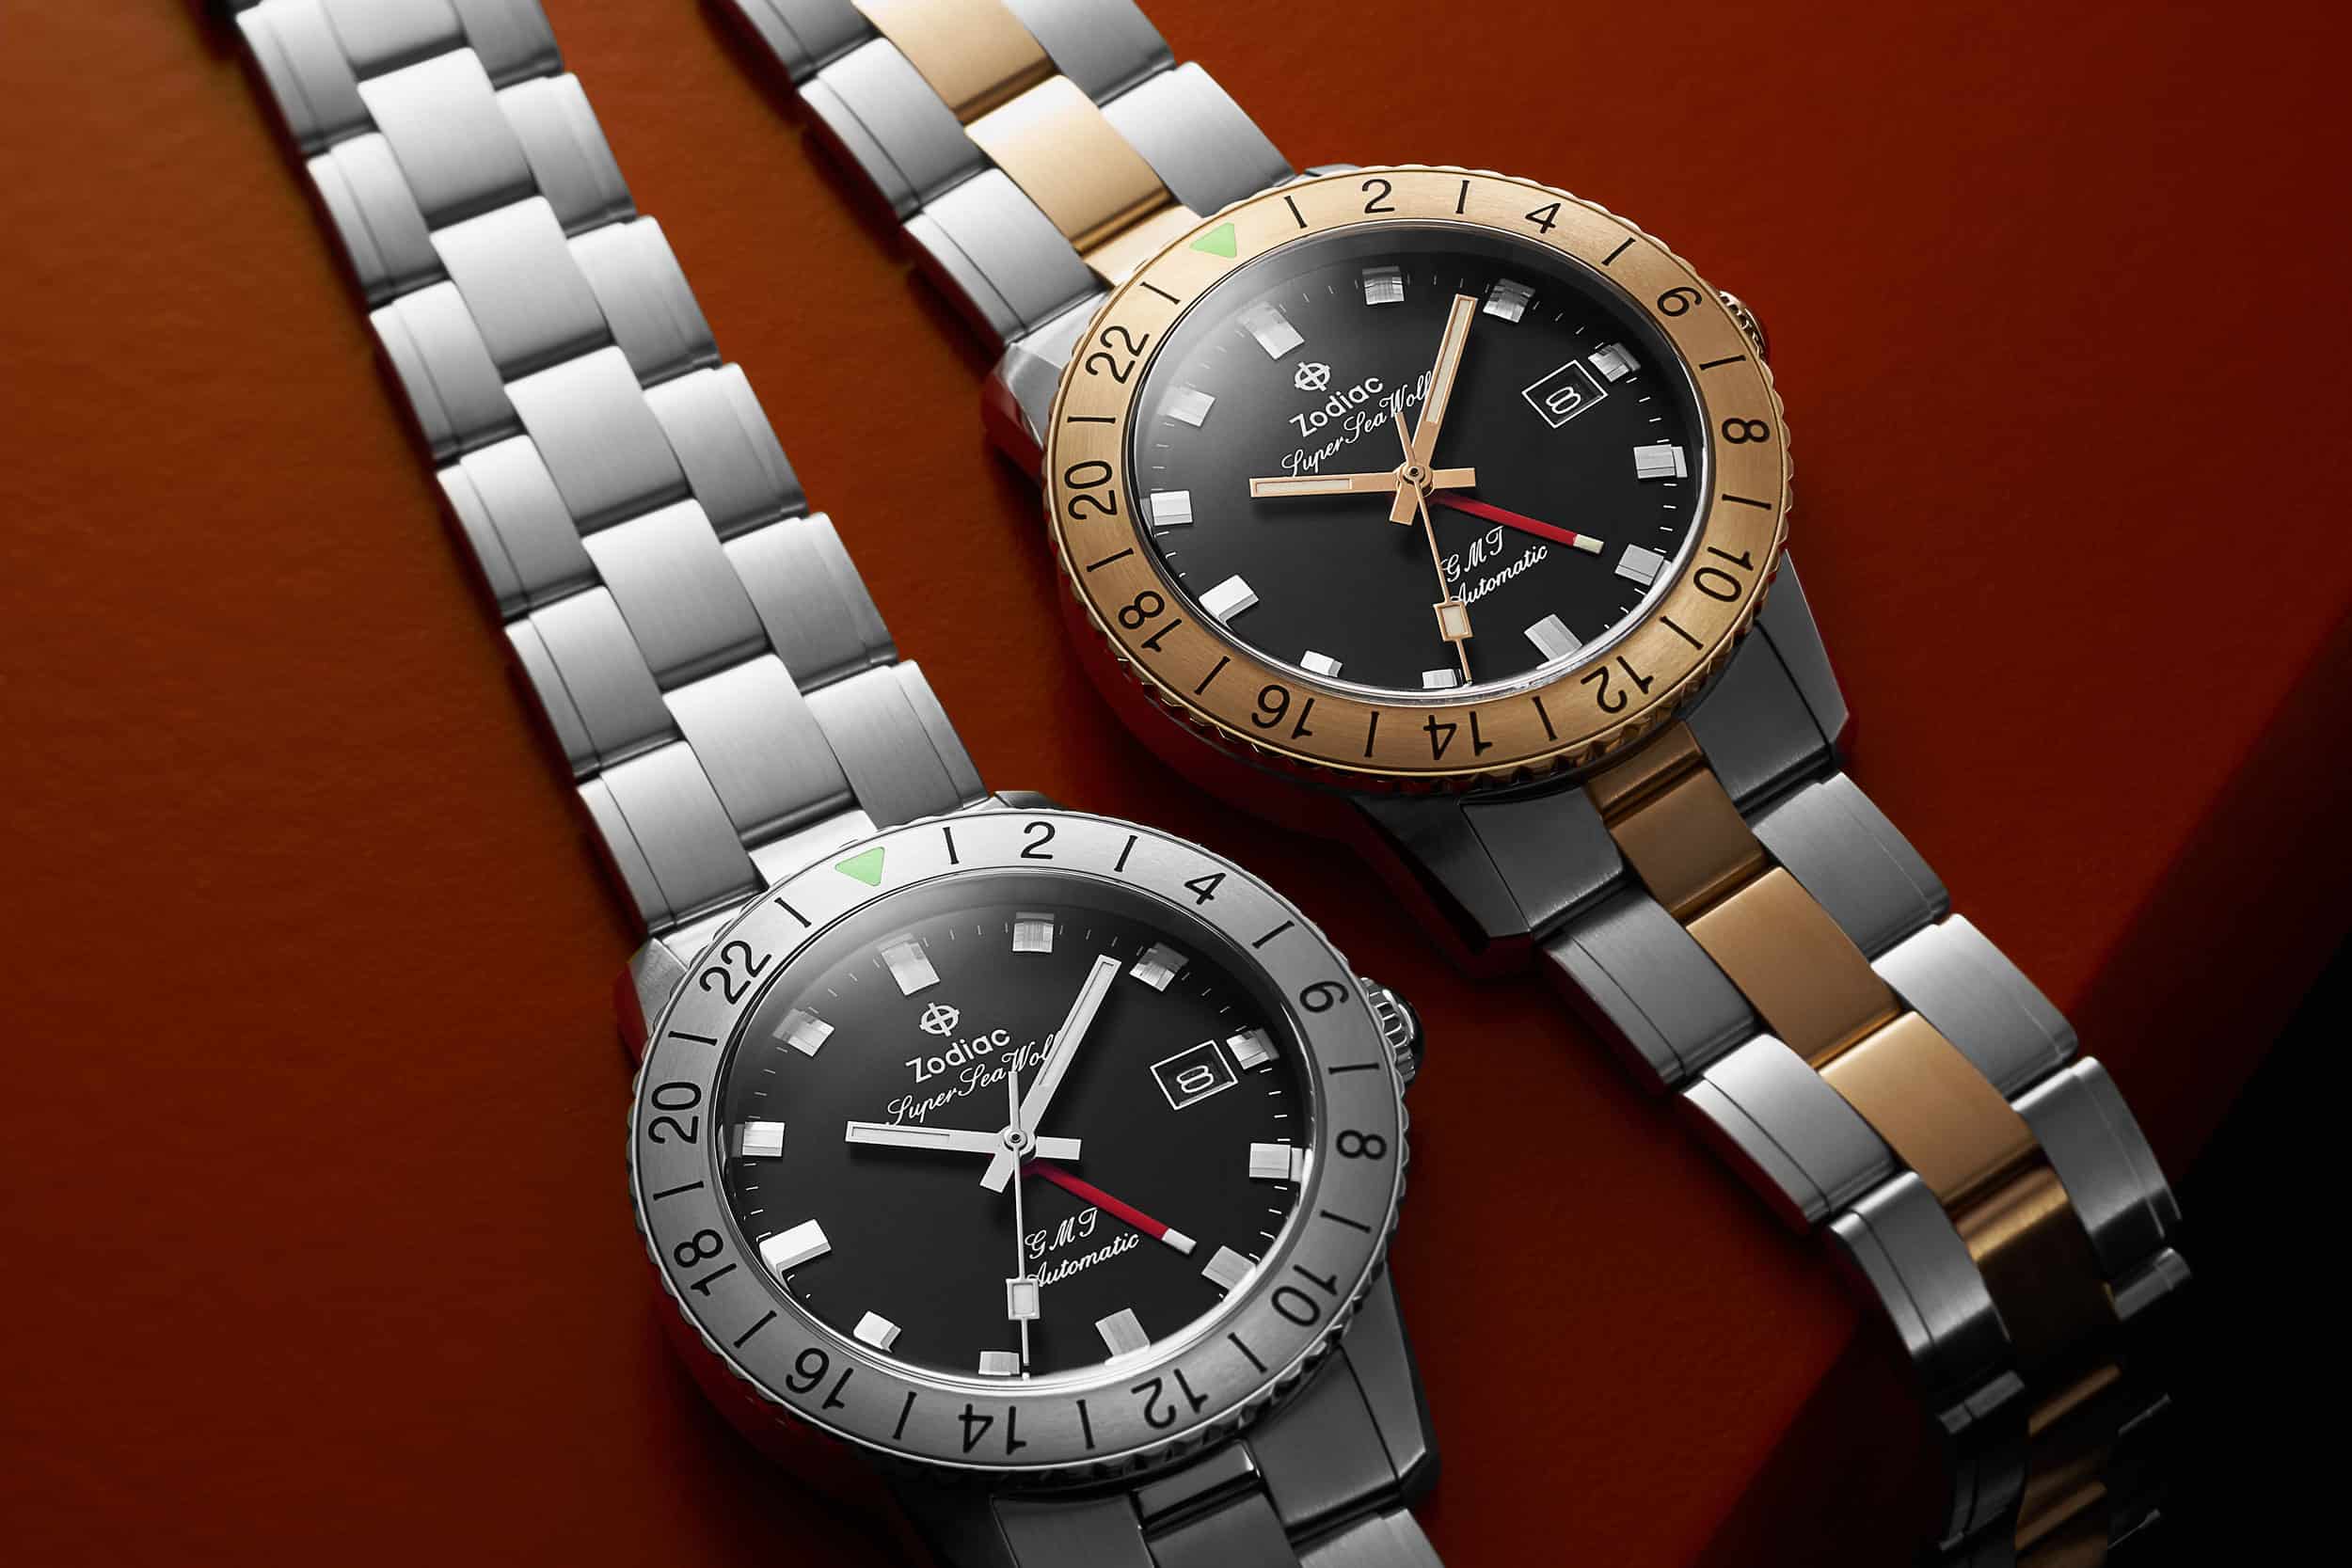 Introducing the Zodiac Super Sea Wolf GMT Open Editions – Now Available at the Windup Watch Shop